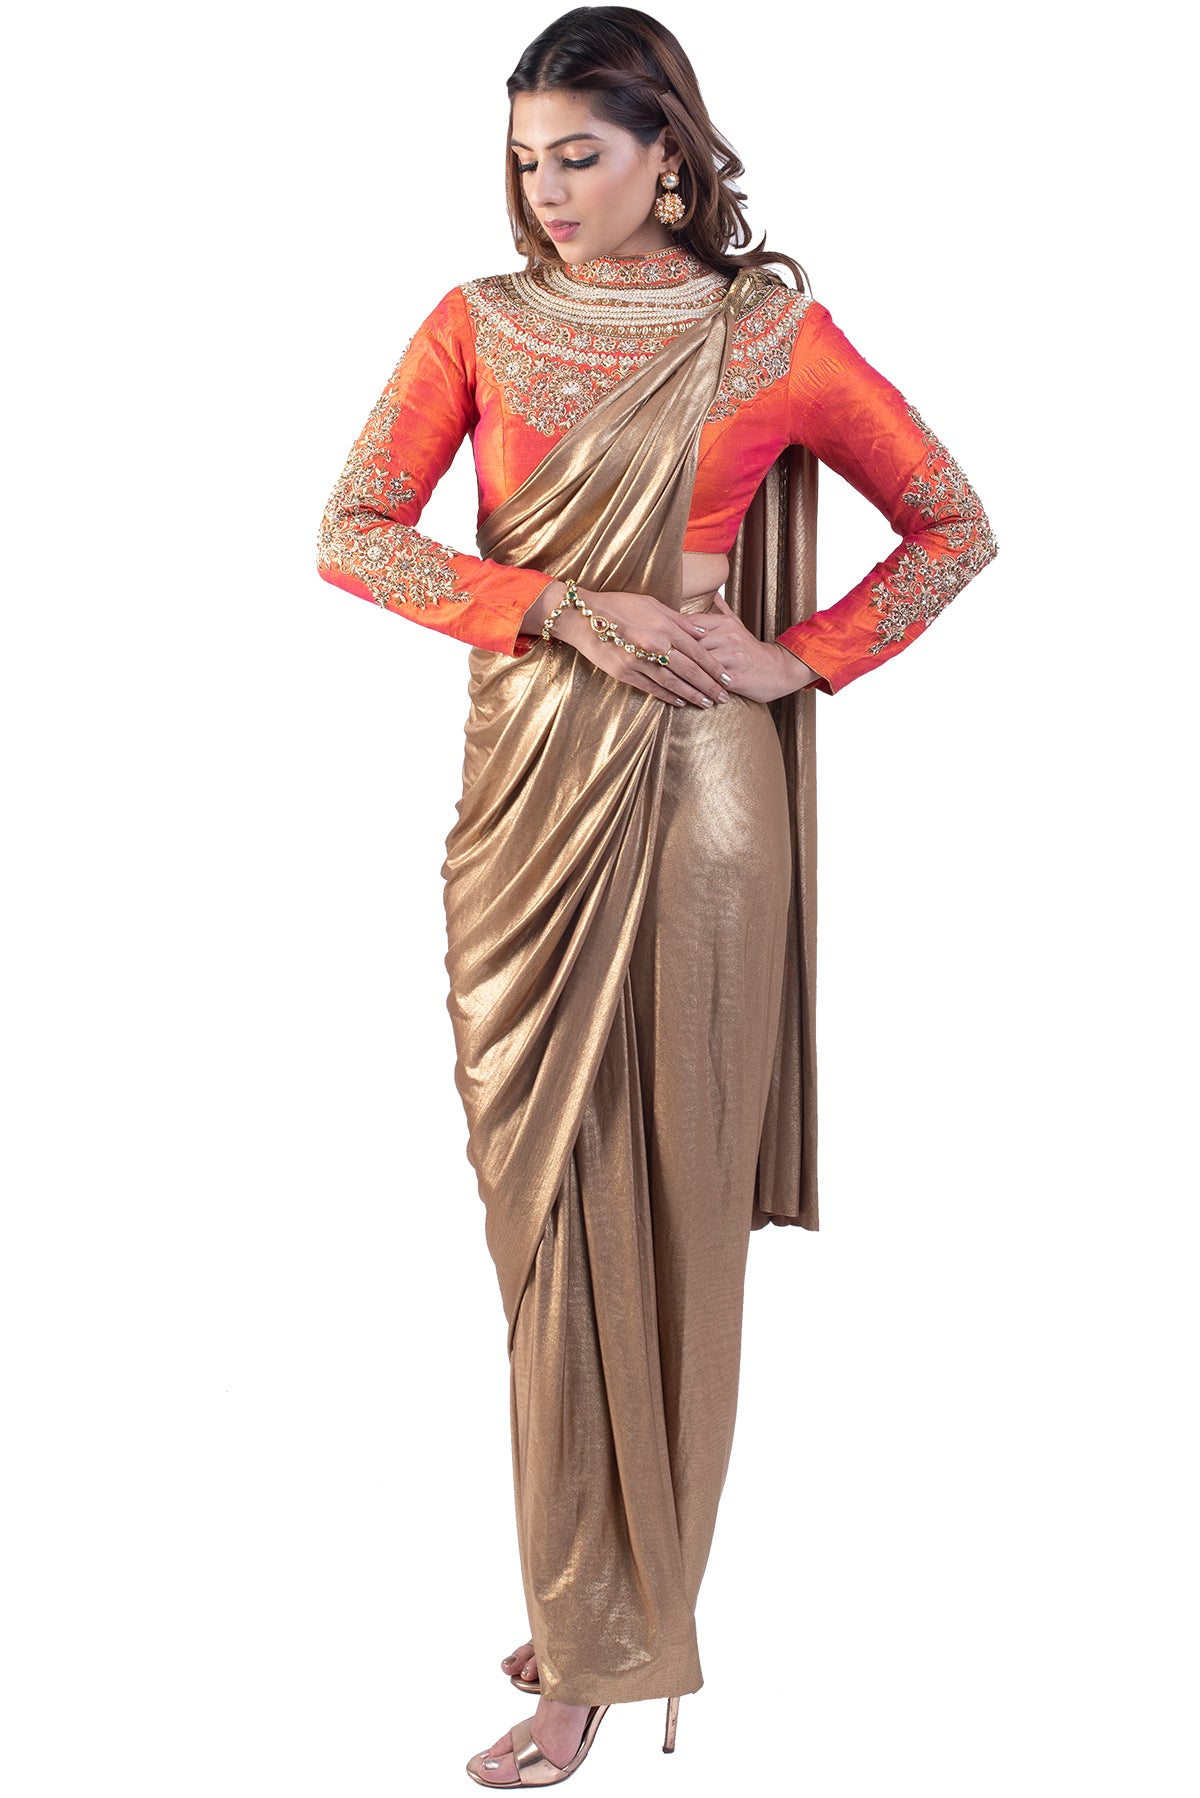 Golden Pre-Stitched Saree With Orange Embroidered Blouse